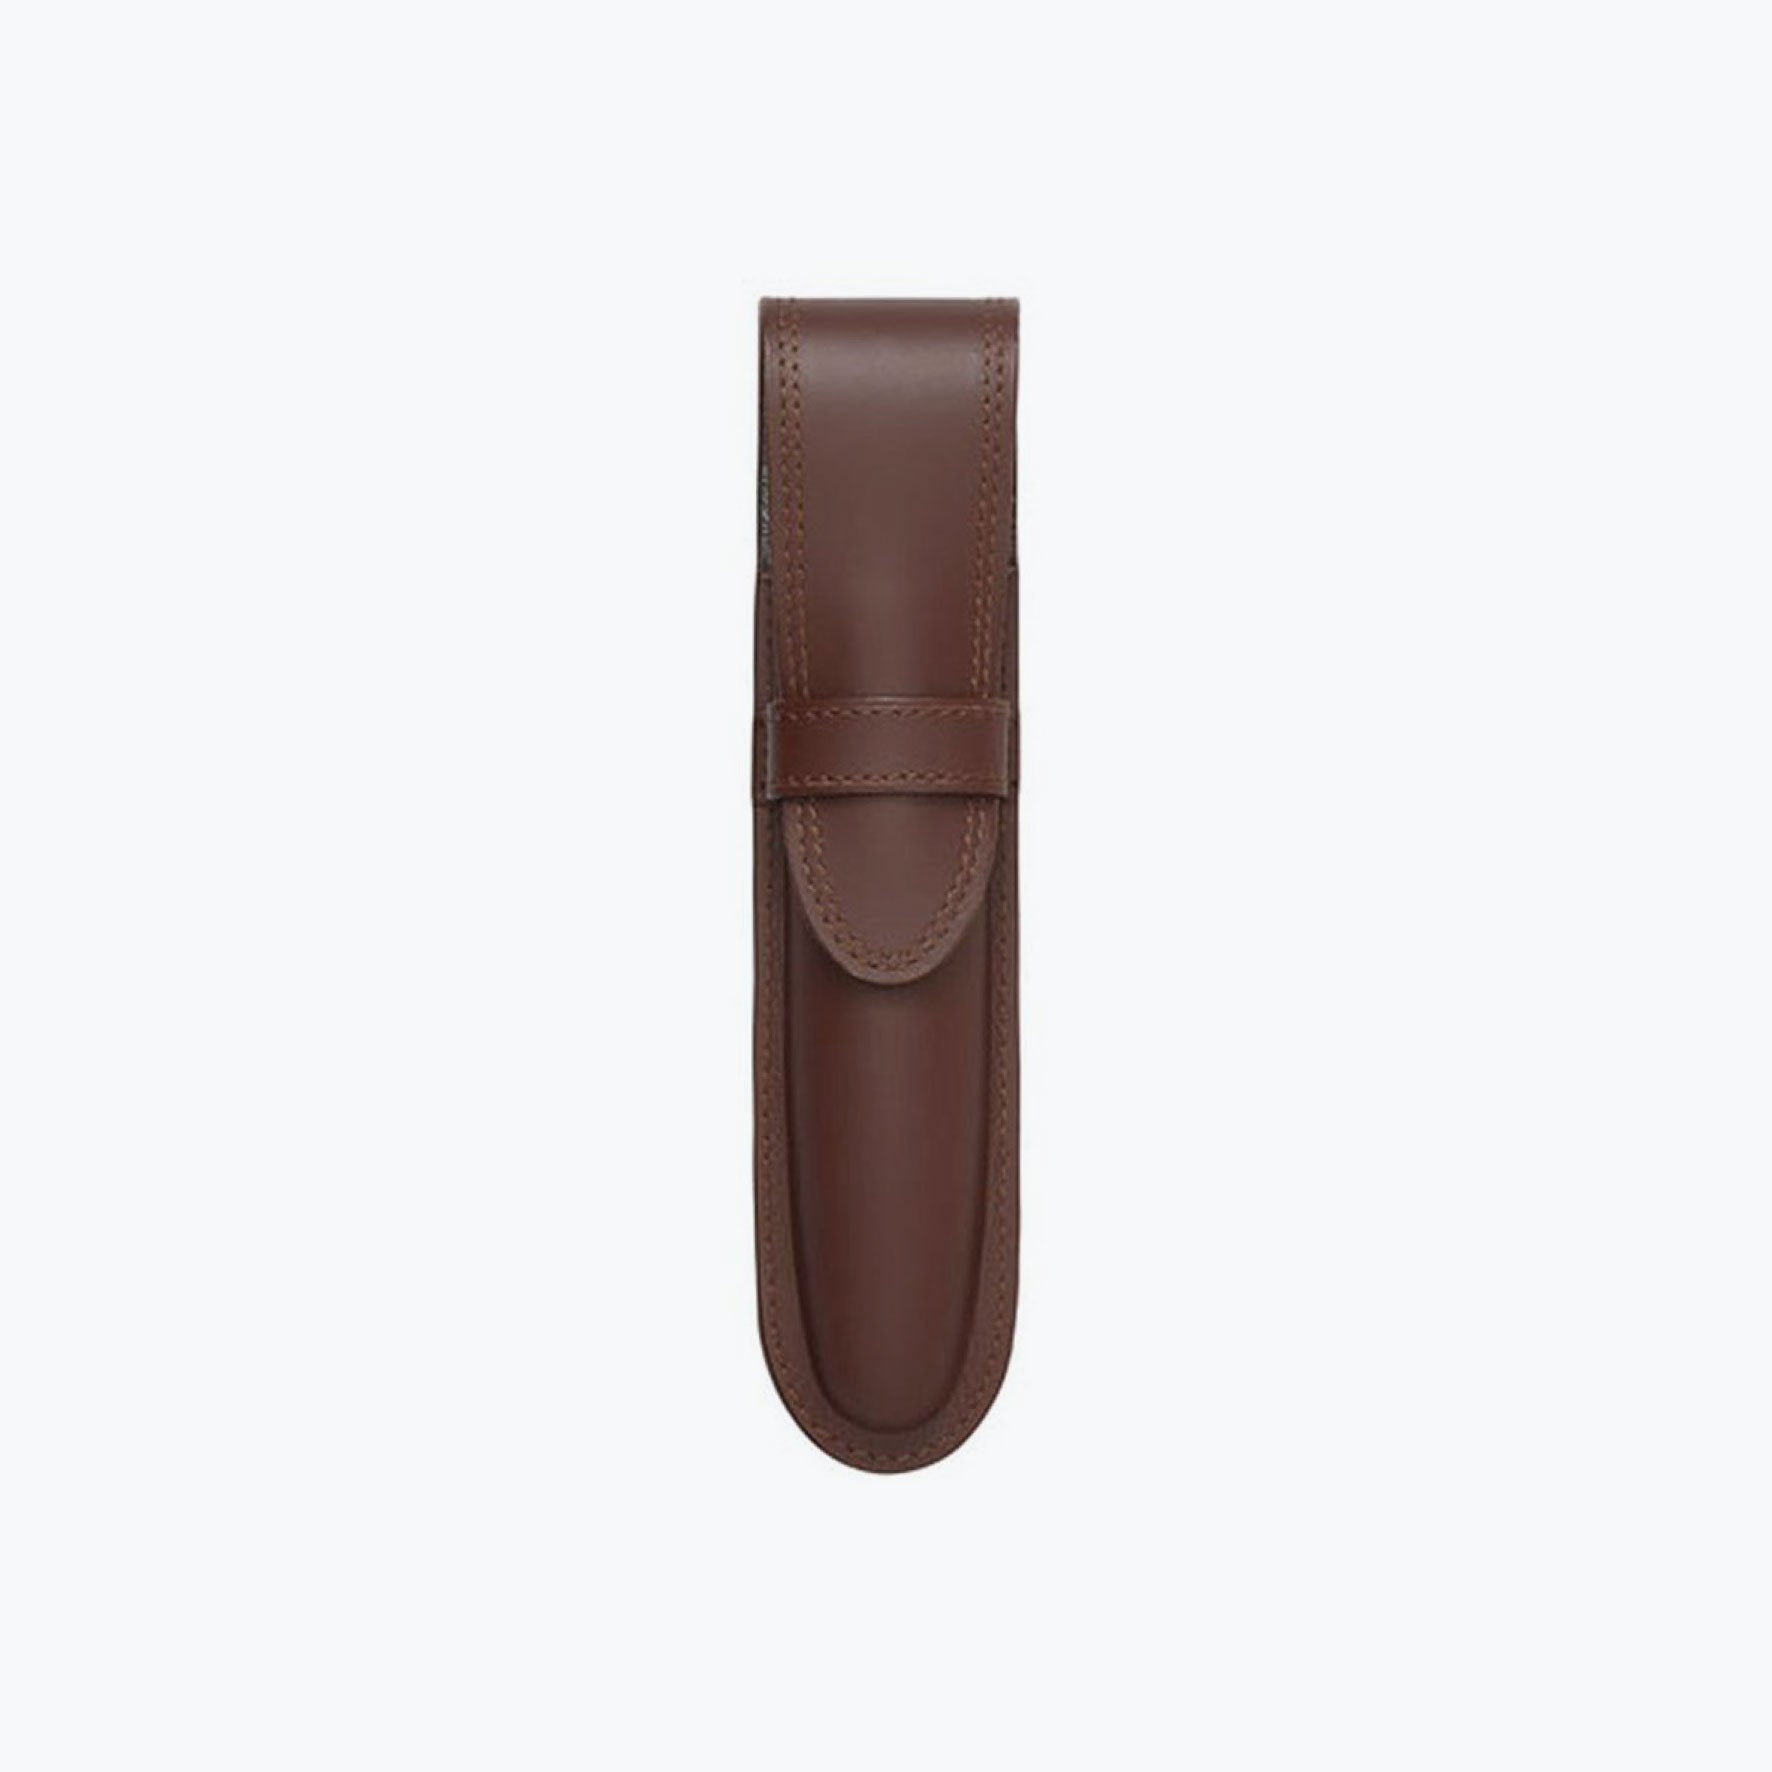 Pilot - Pen Pouch - Trender Leather - For One - Dark Brown <Outgoing>